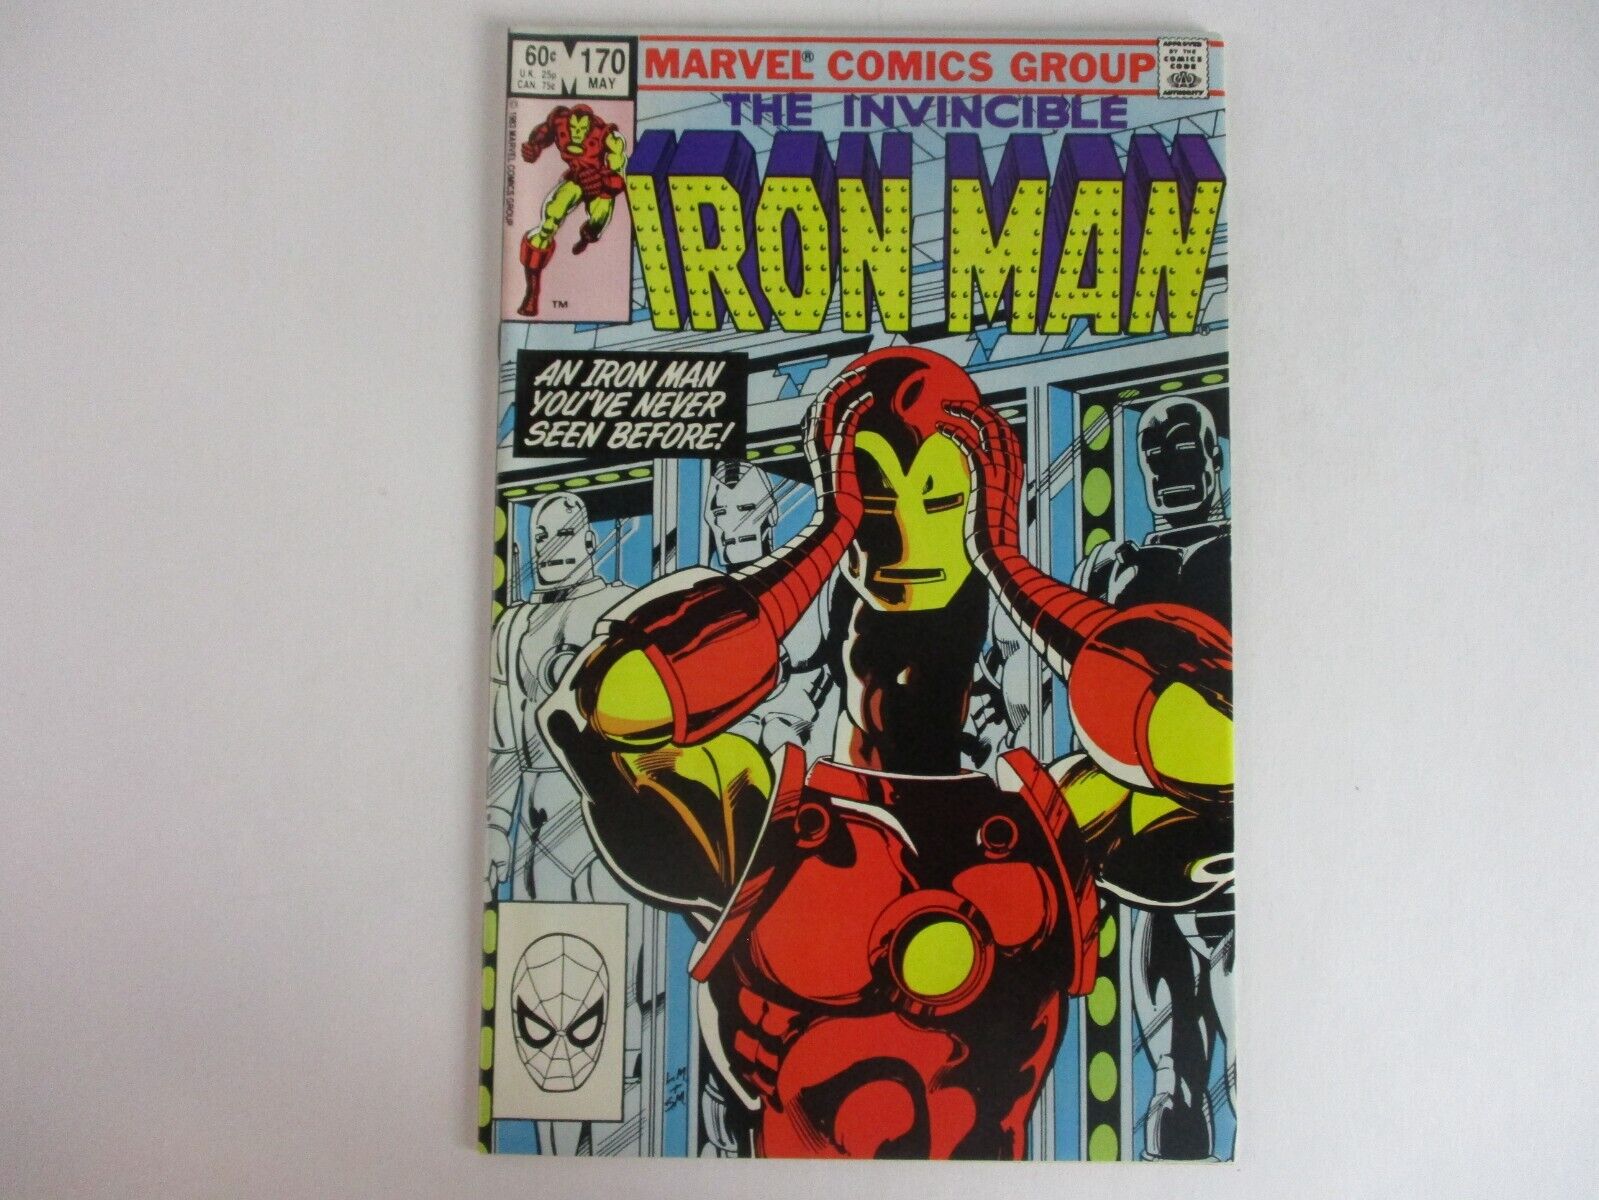 Marvel Comics THE INVINCIBLE IRON MAN #170 May 1983 LOOKS GREAT